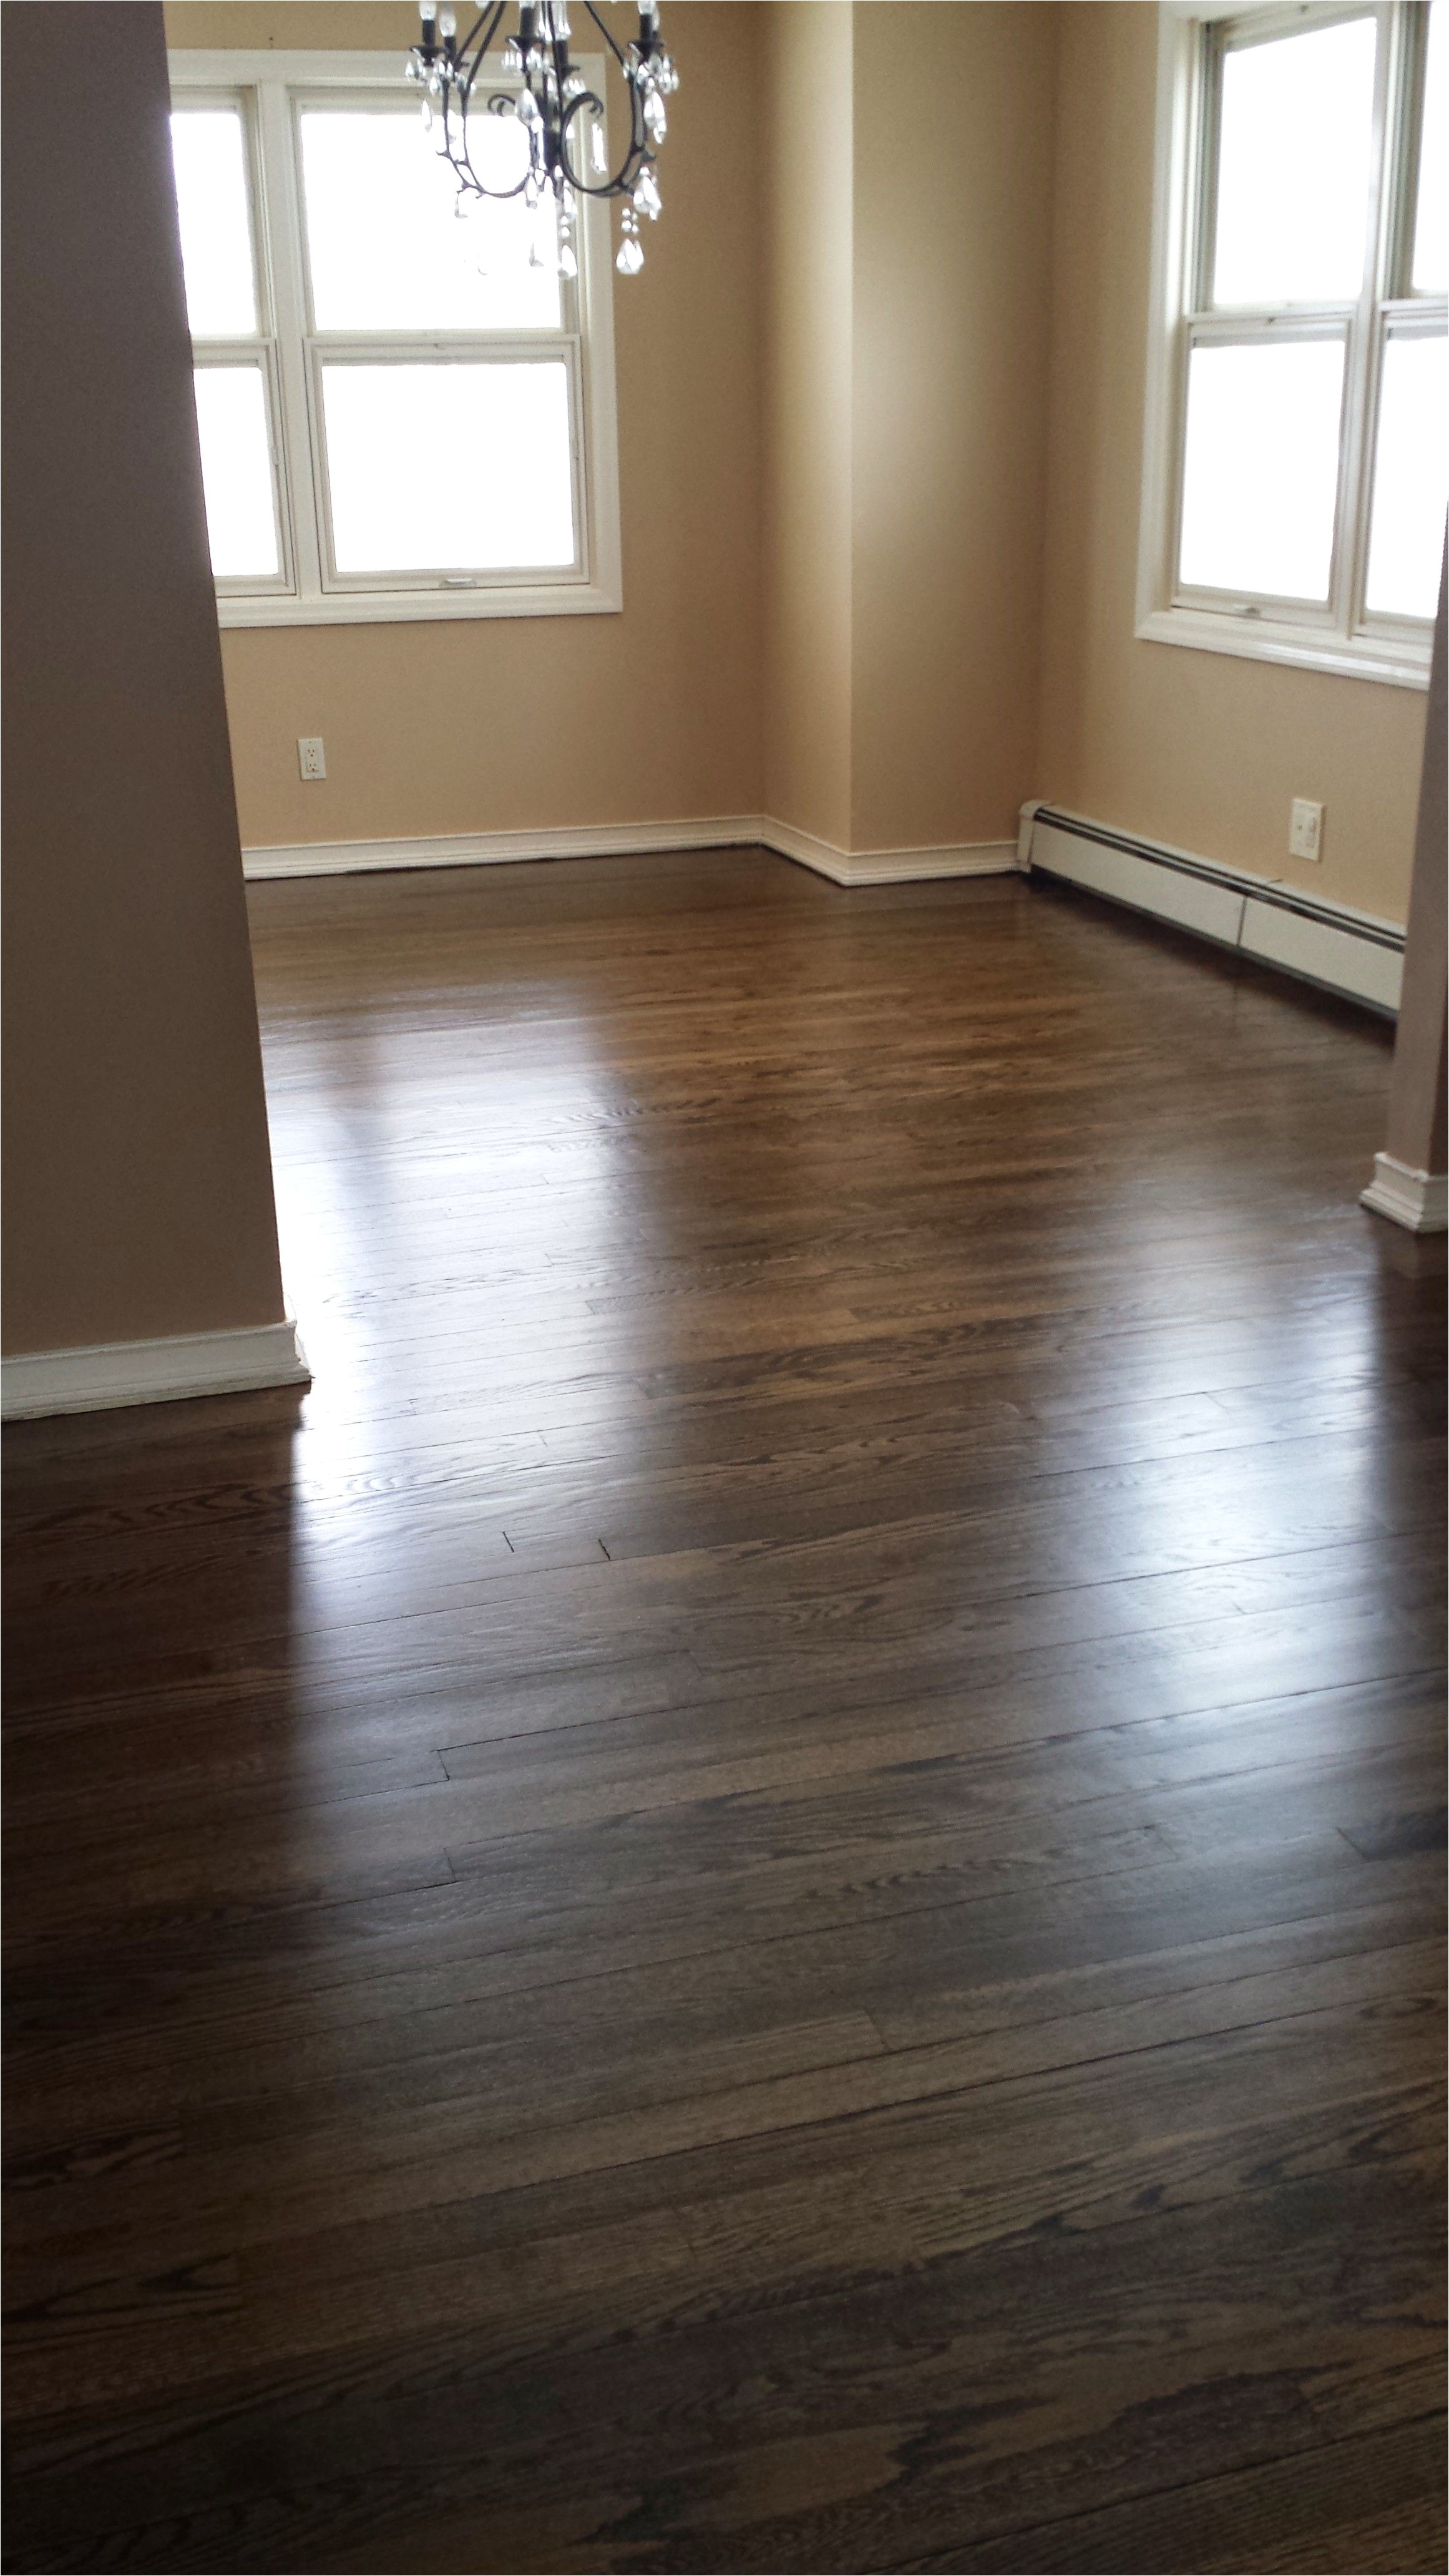 24 Recommended How Long Does It Take to Refinish Hardwood Floors 2023 free download how long does it take to refinish hardwood floors of refinish hardwood floors diy dahuacctvth com in refinish hardwood floors diy